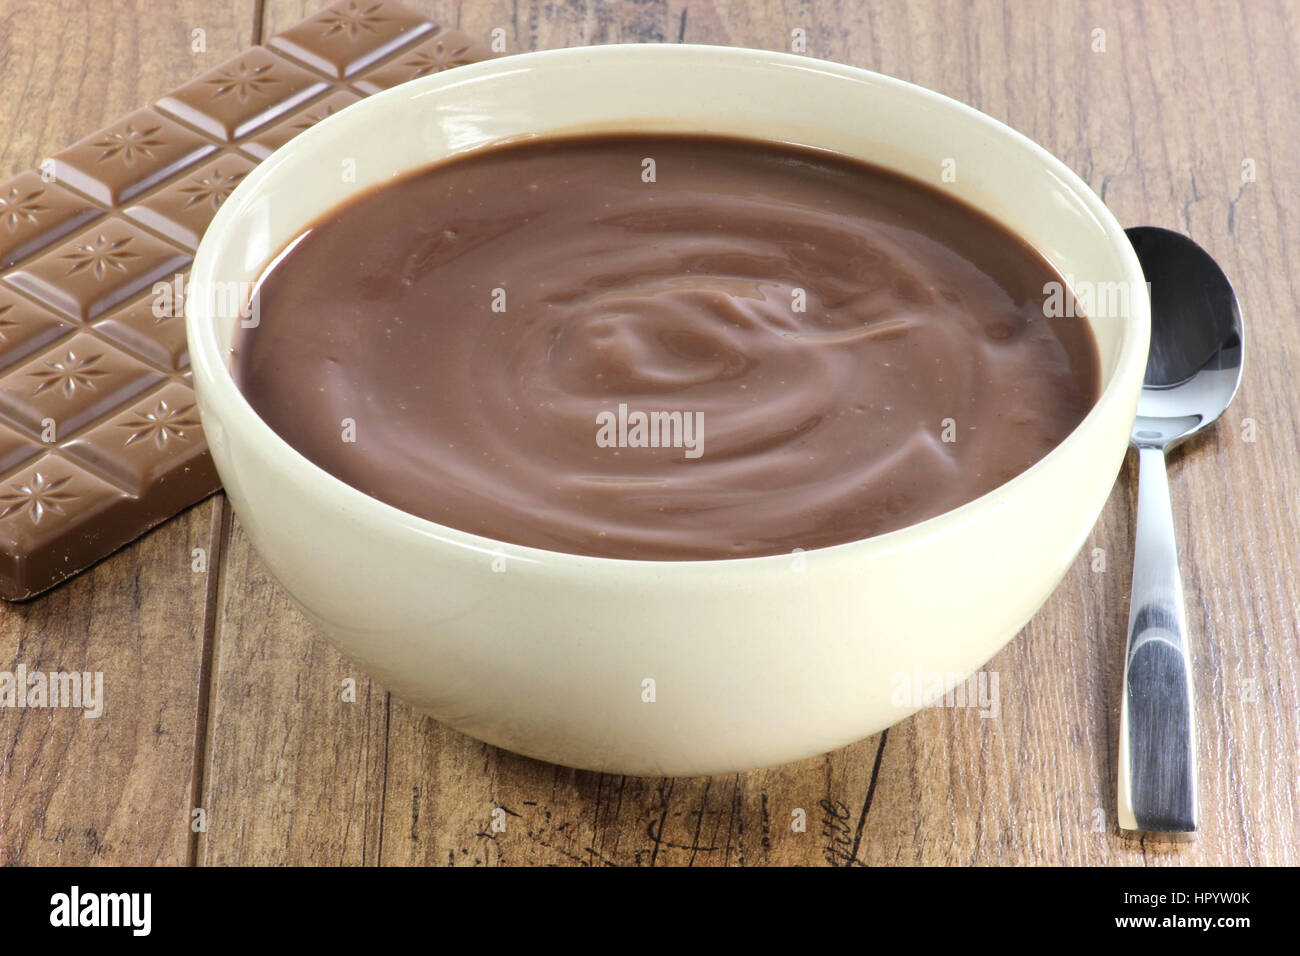 chocolate pudding in a bowl on wooden background Stock Photo